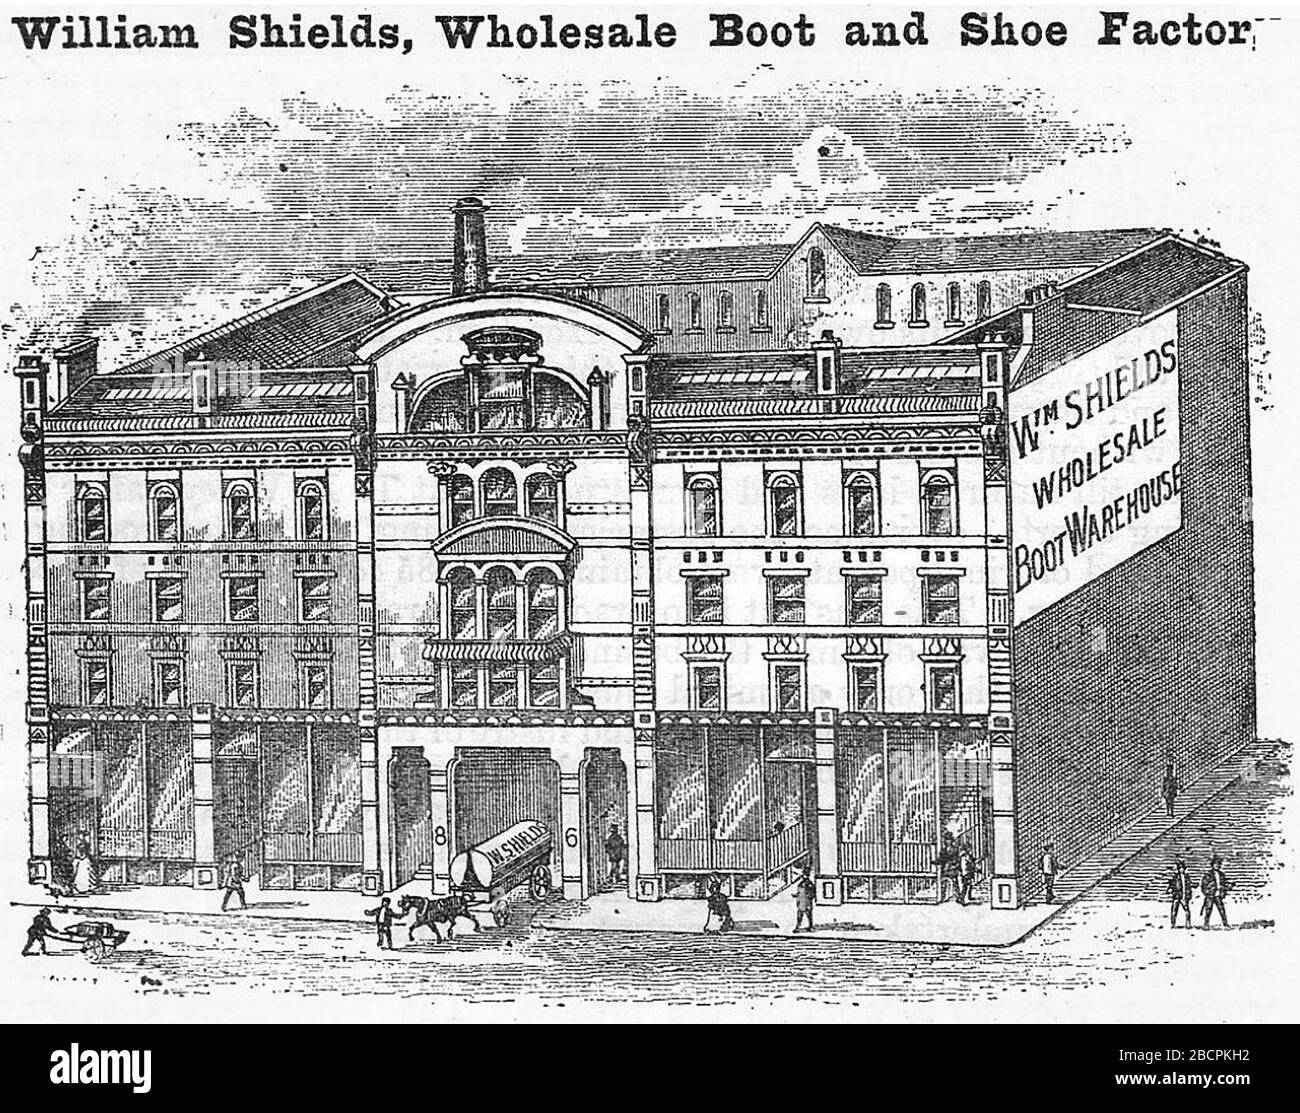 William Shields, Wholesale Boot and shoe factor, Bradford 1893 Foto Stock